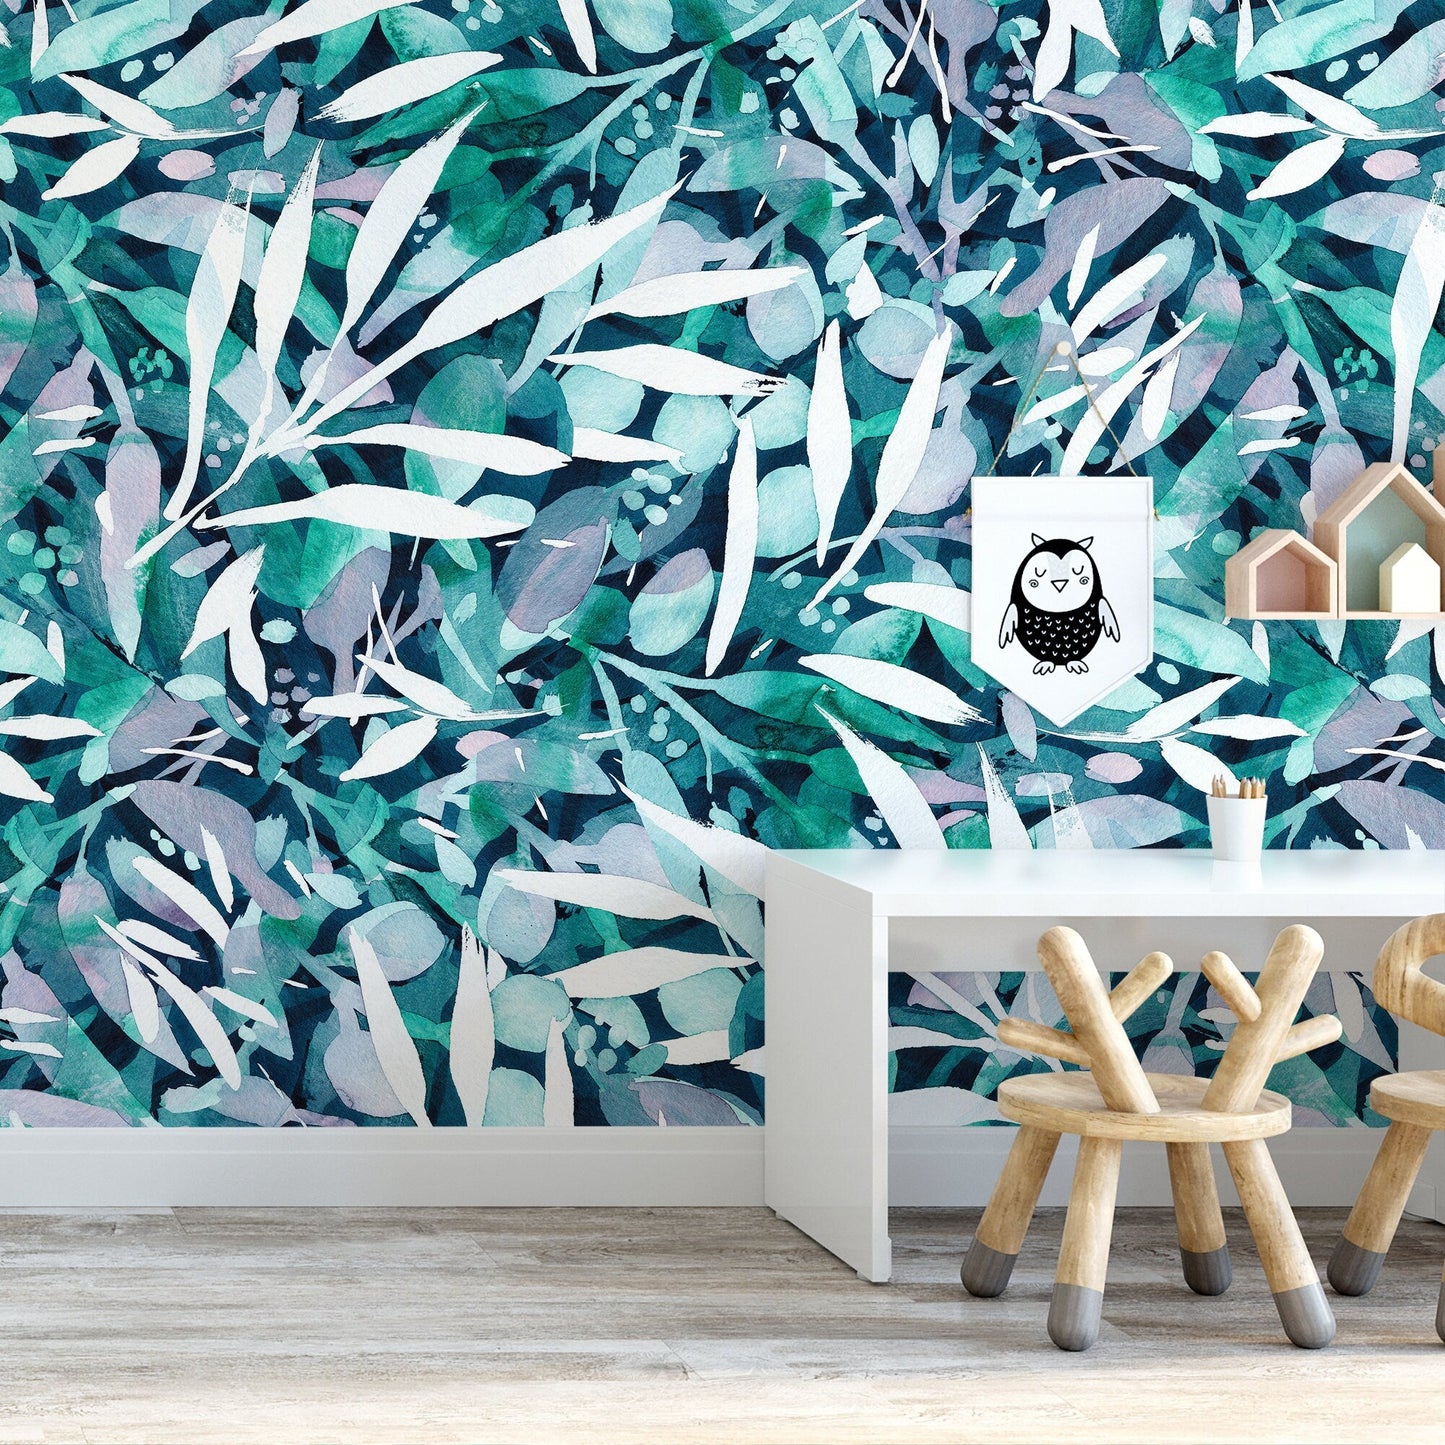 Wallpaper Peel and Stick Wallpaper Removable Wallpaper Home Decor Wall Art Wall Decor Room Decor / Floral Abstract Leaves Wallpaper - X150